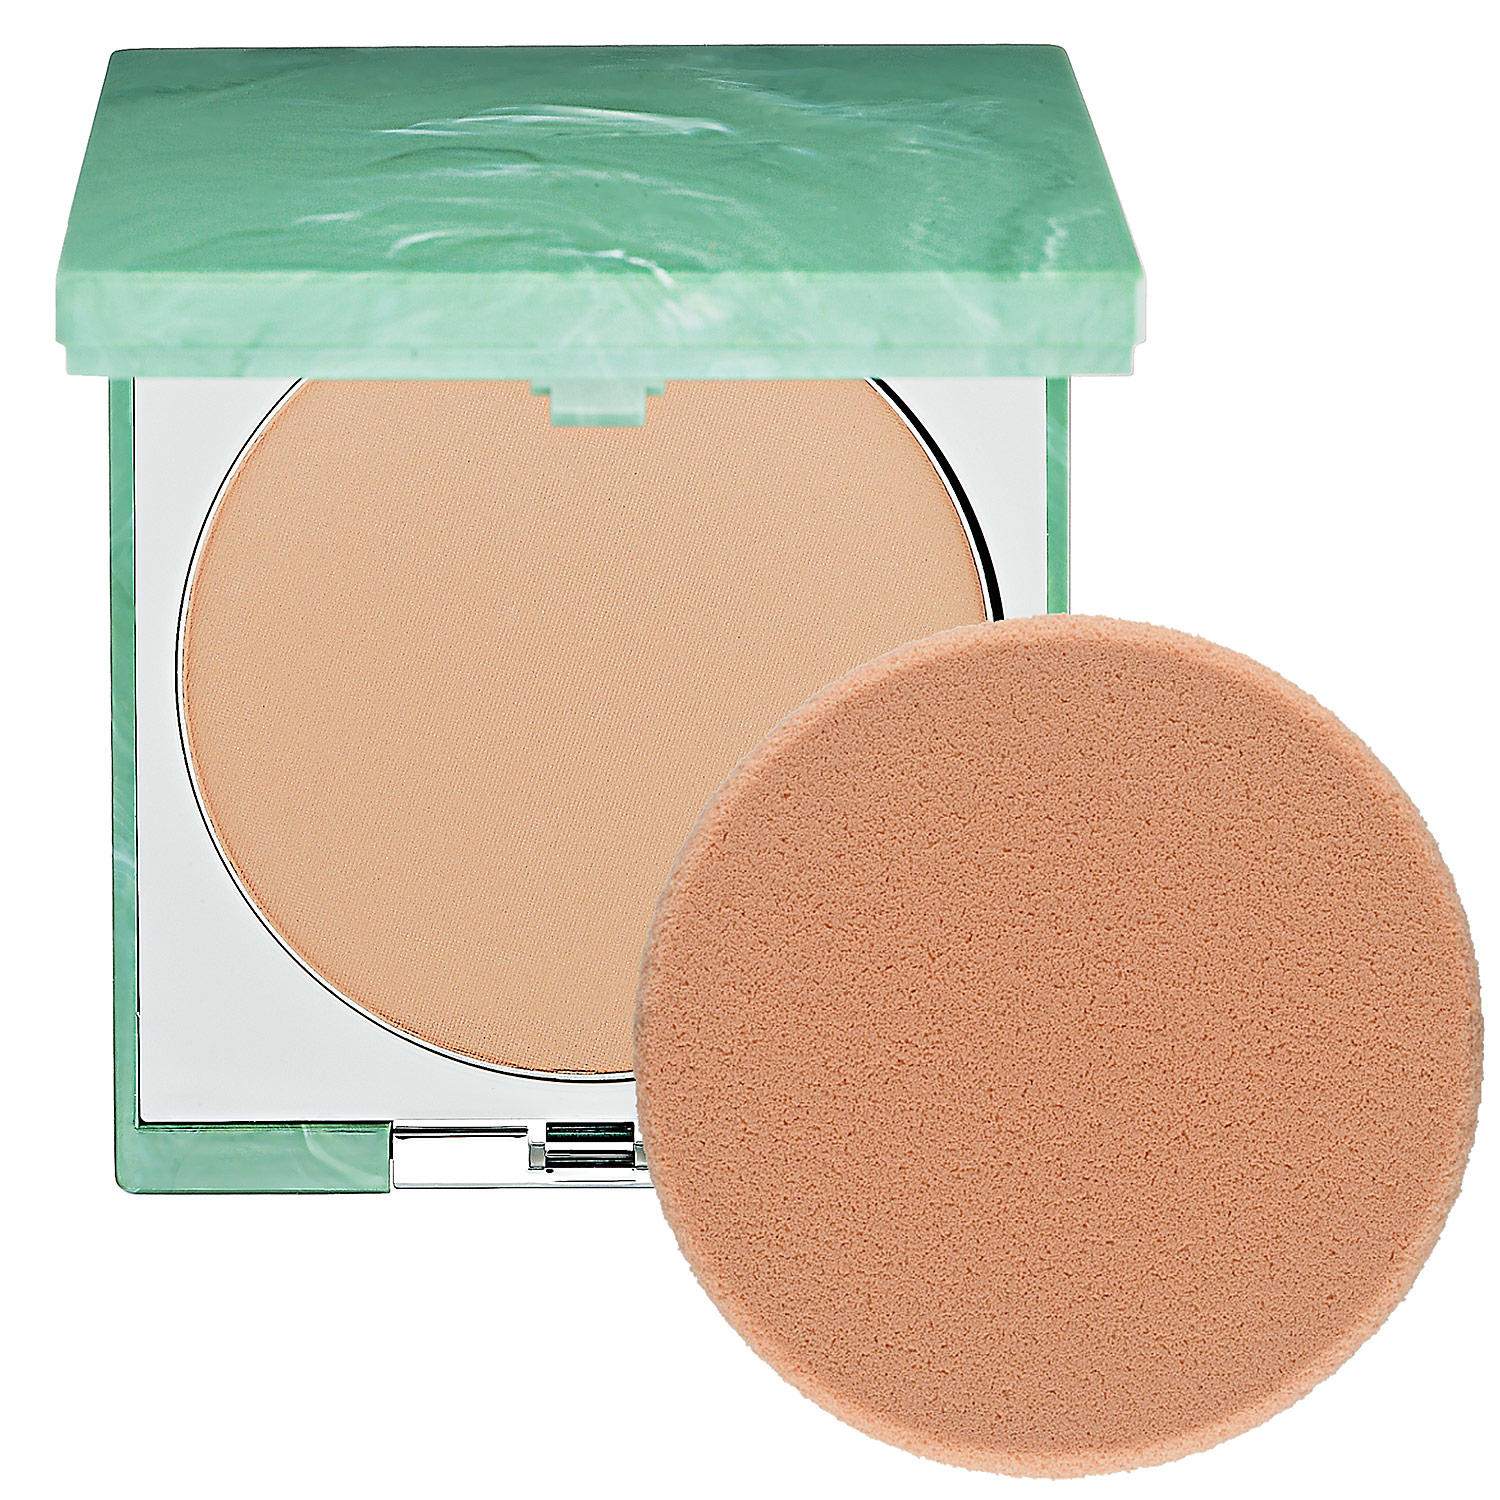 Clinique Stay-Matte Sheer Pressed Powder 18 Stay Cream